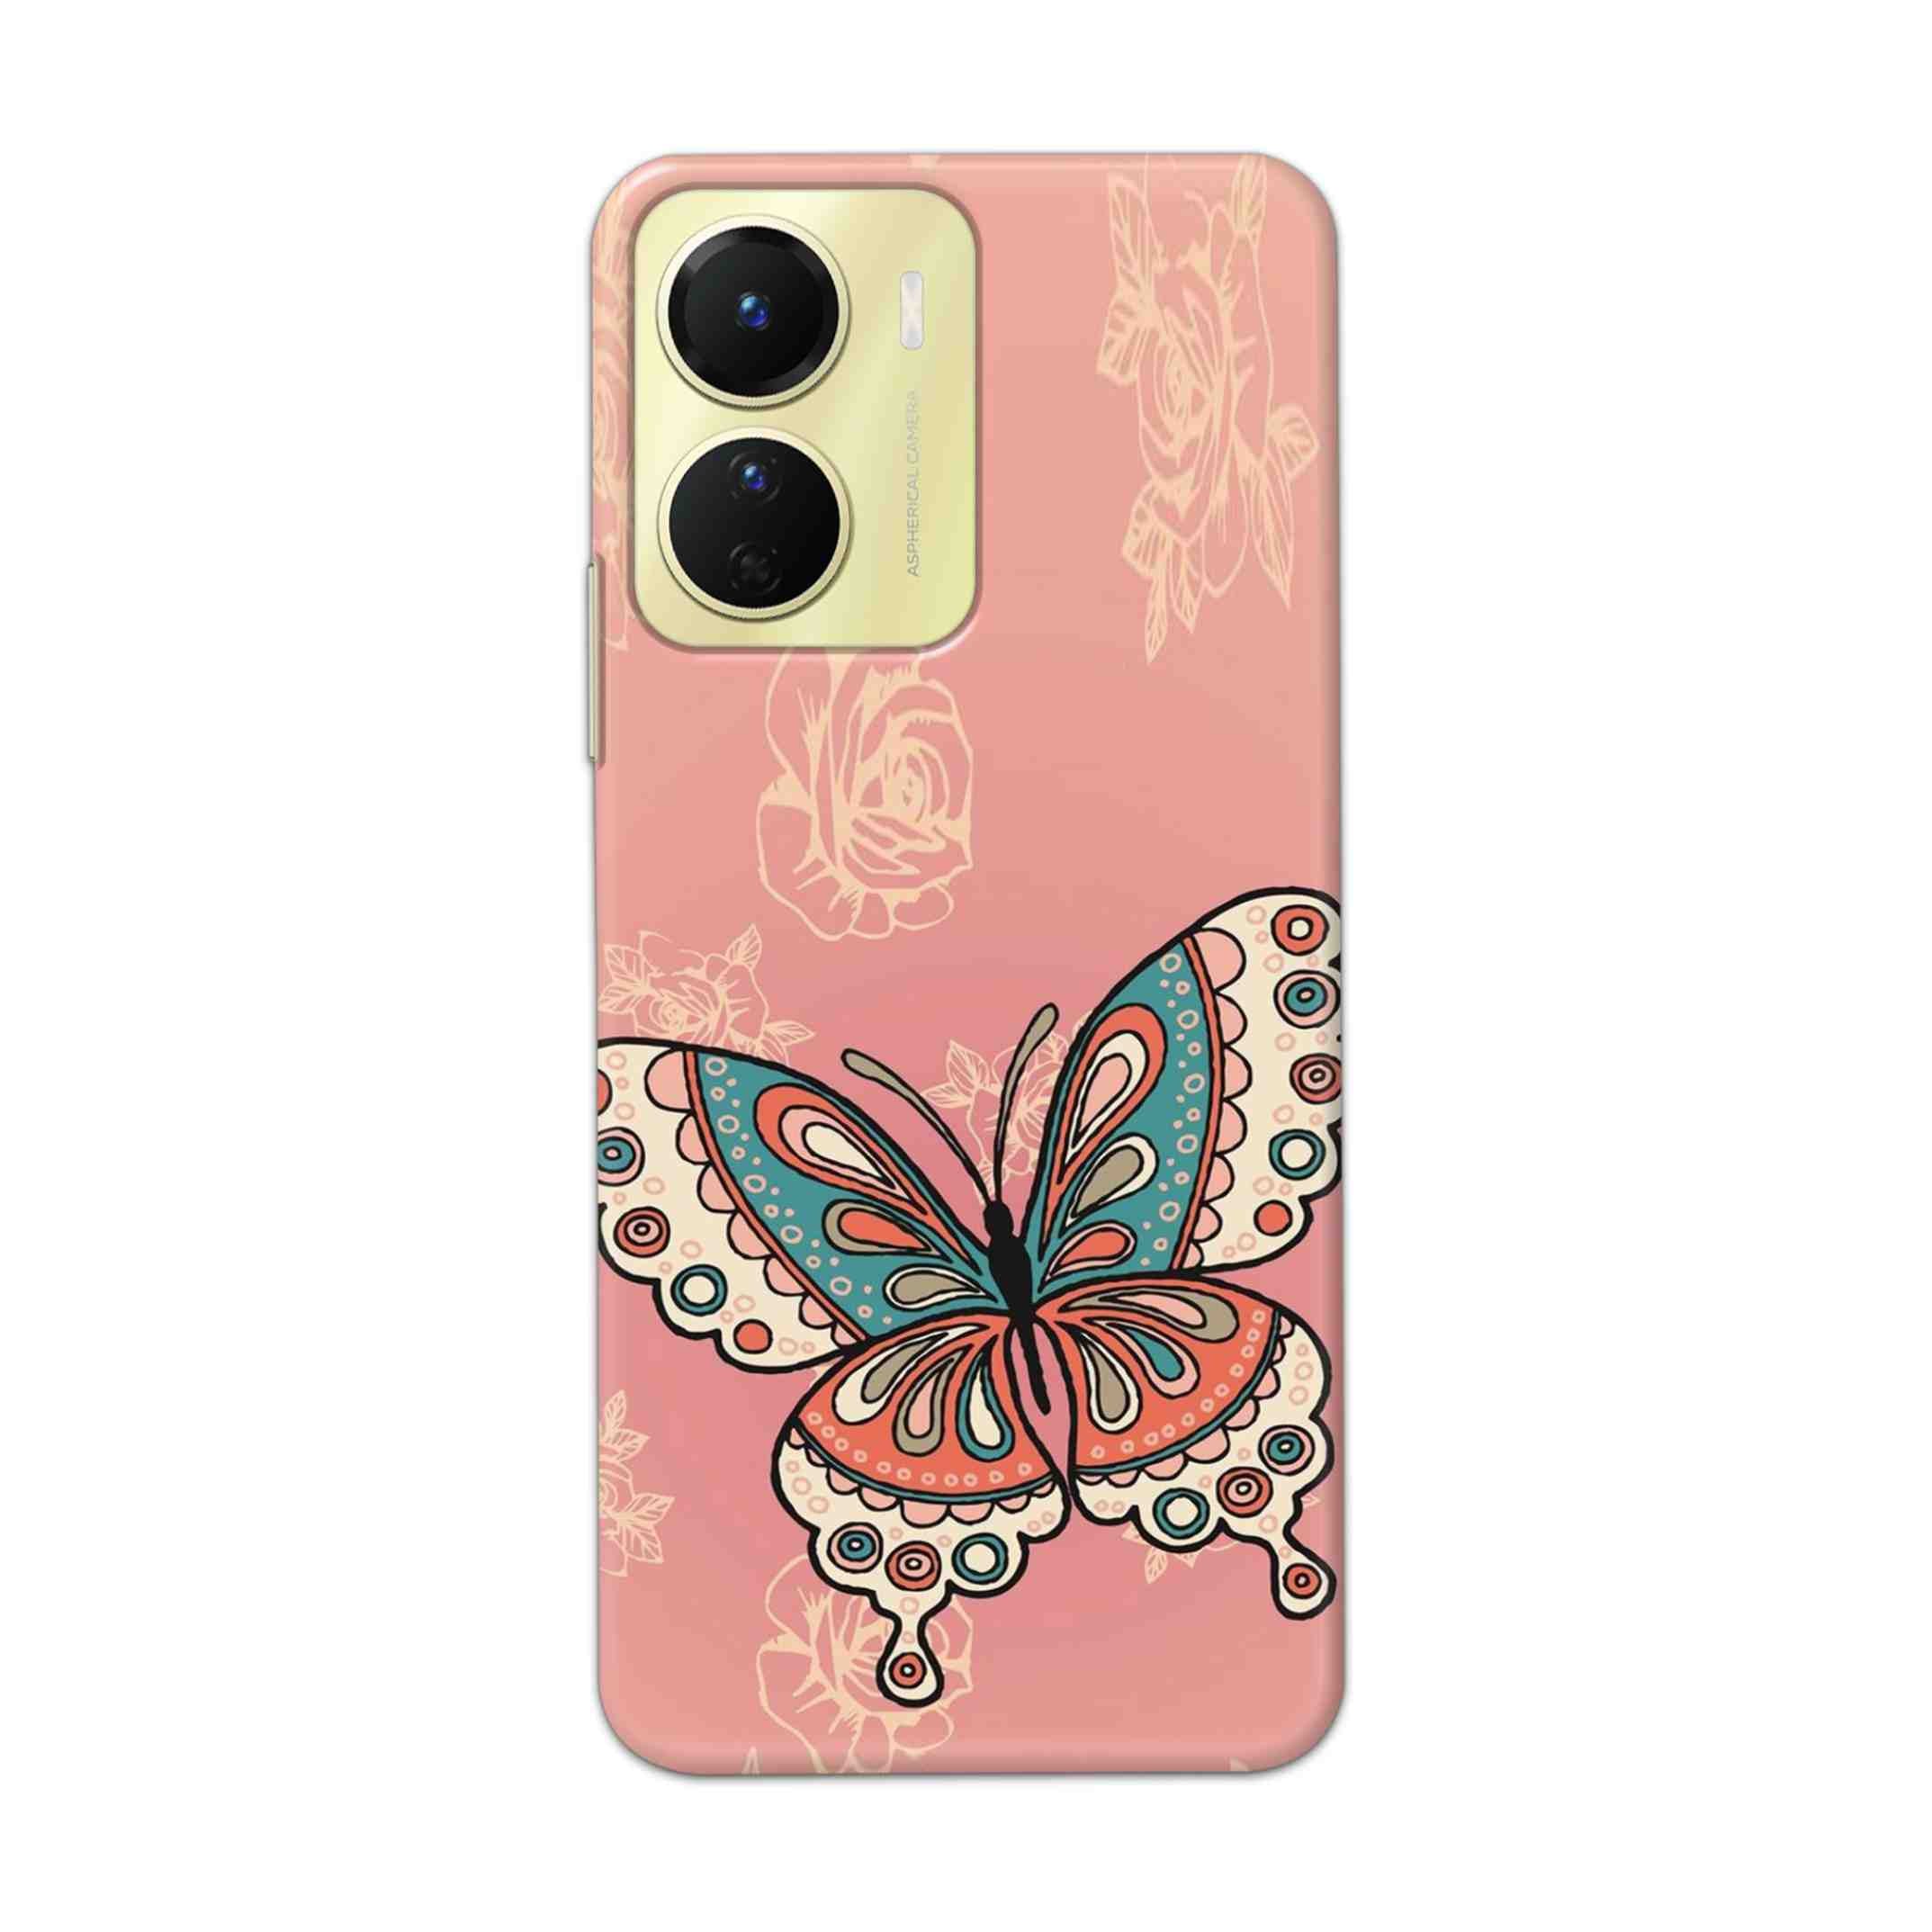 Buy Butterfly Hard Back Mobile Phone Case Cover For Vivo Y16 Online